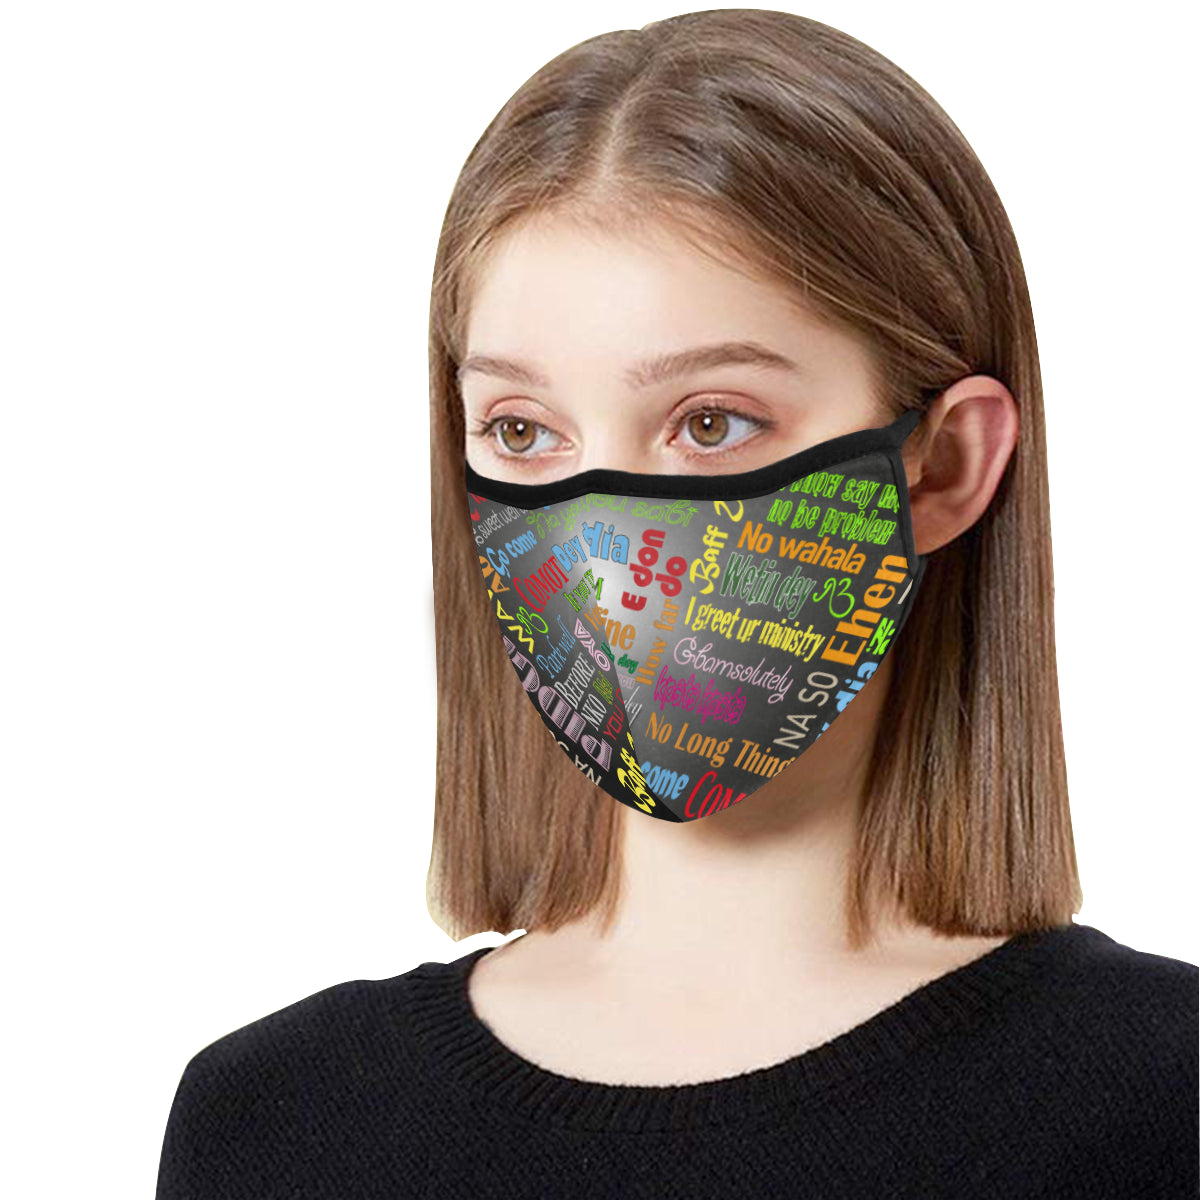 AfriBix Pidgin Print Cotton Fabric Face Mask with filter slot (30 Filters Included) - Non-medical use